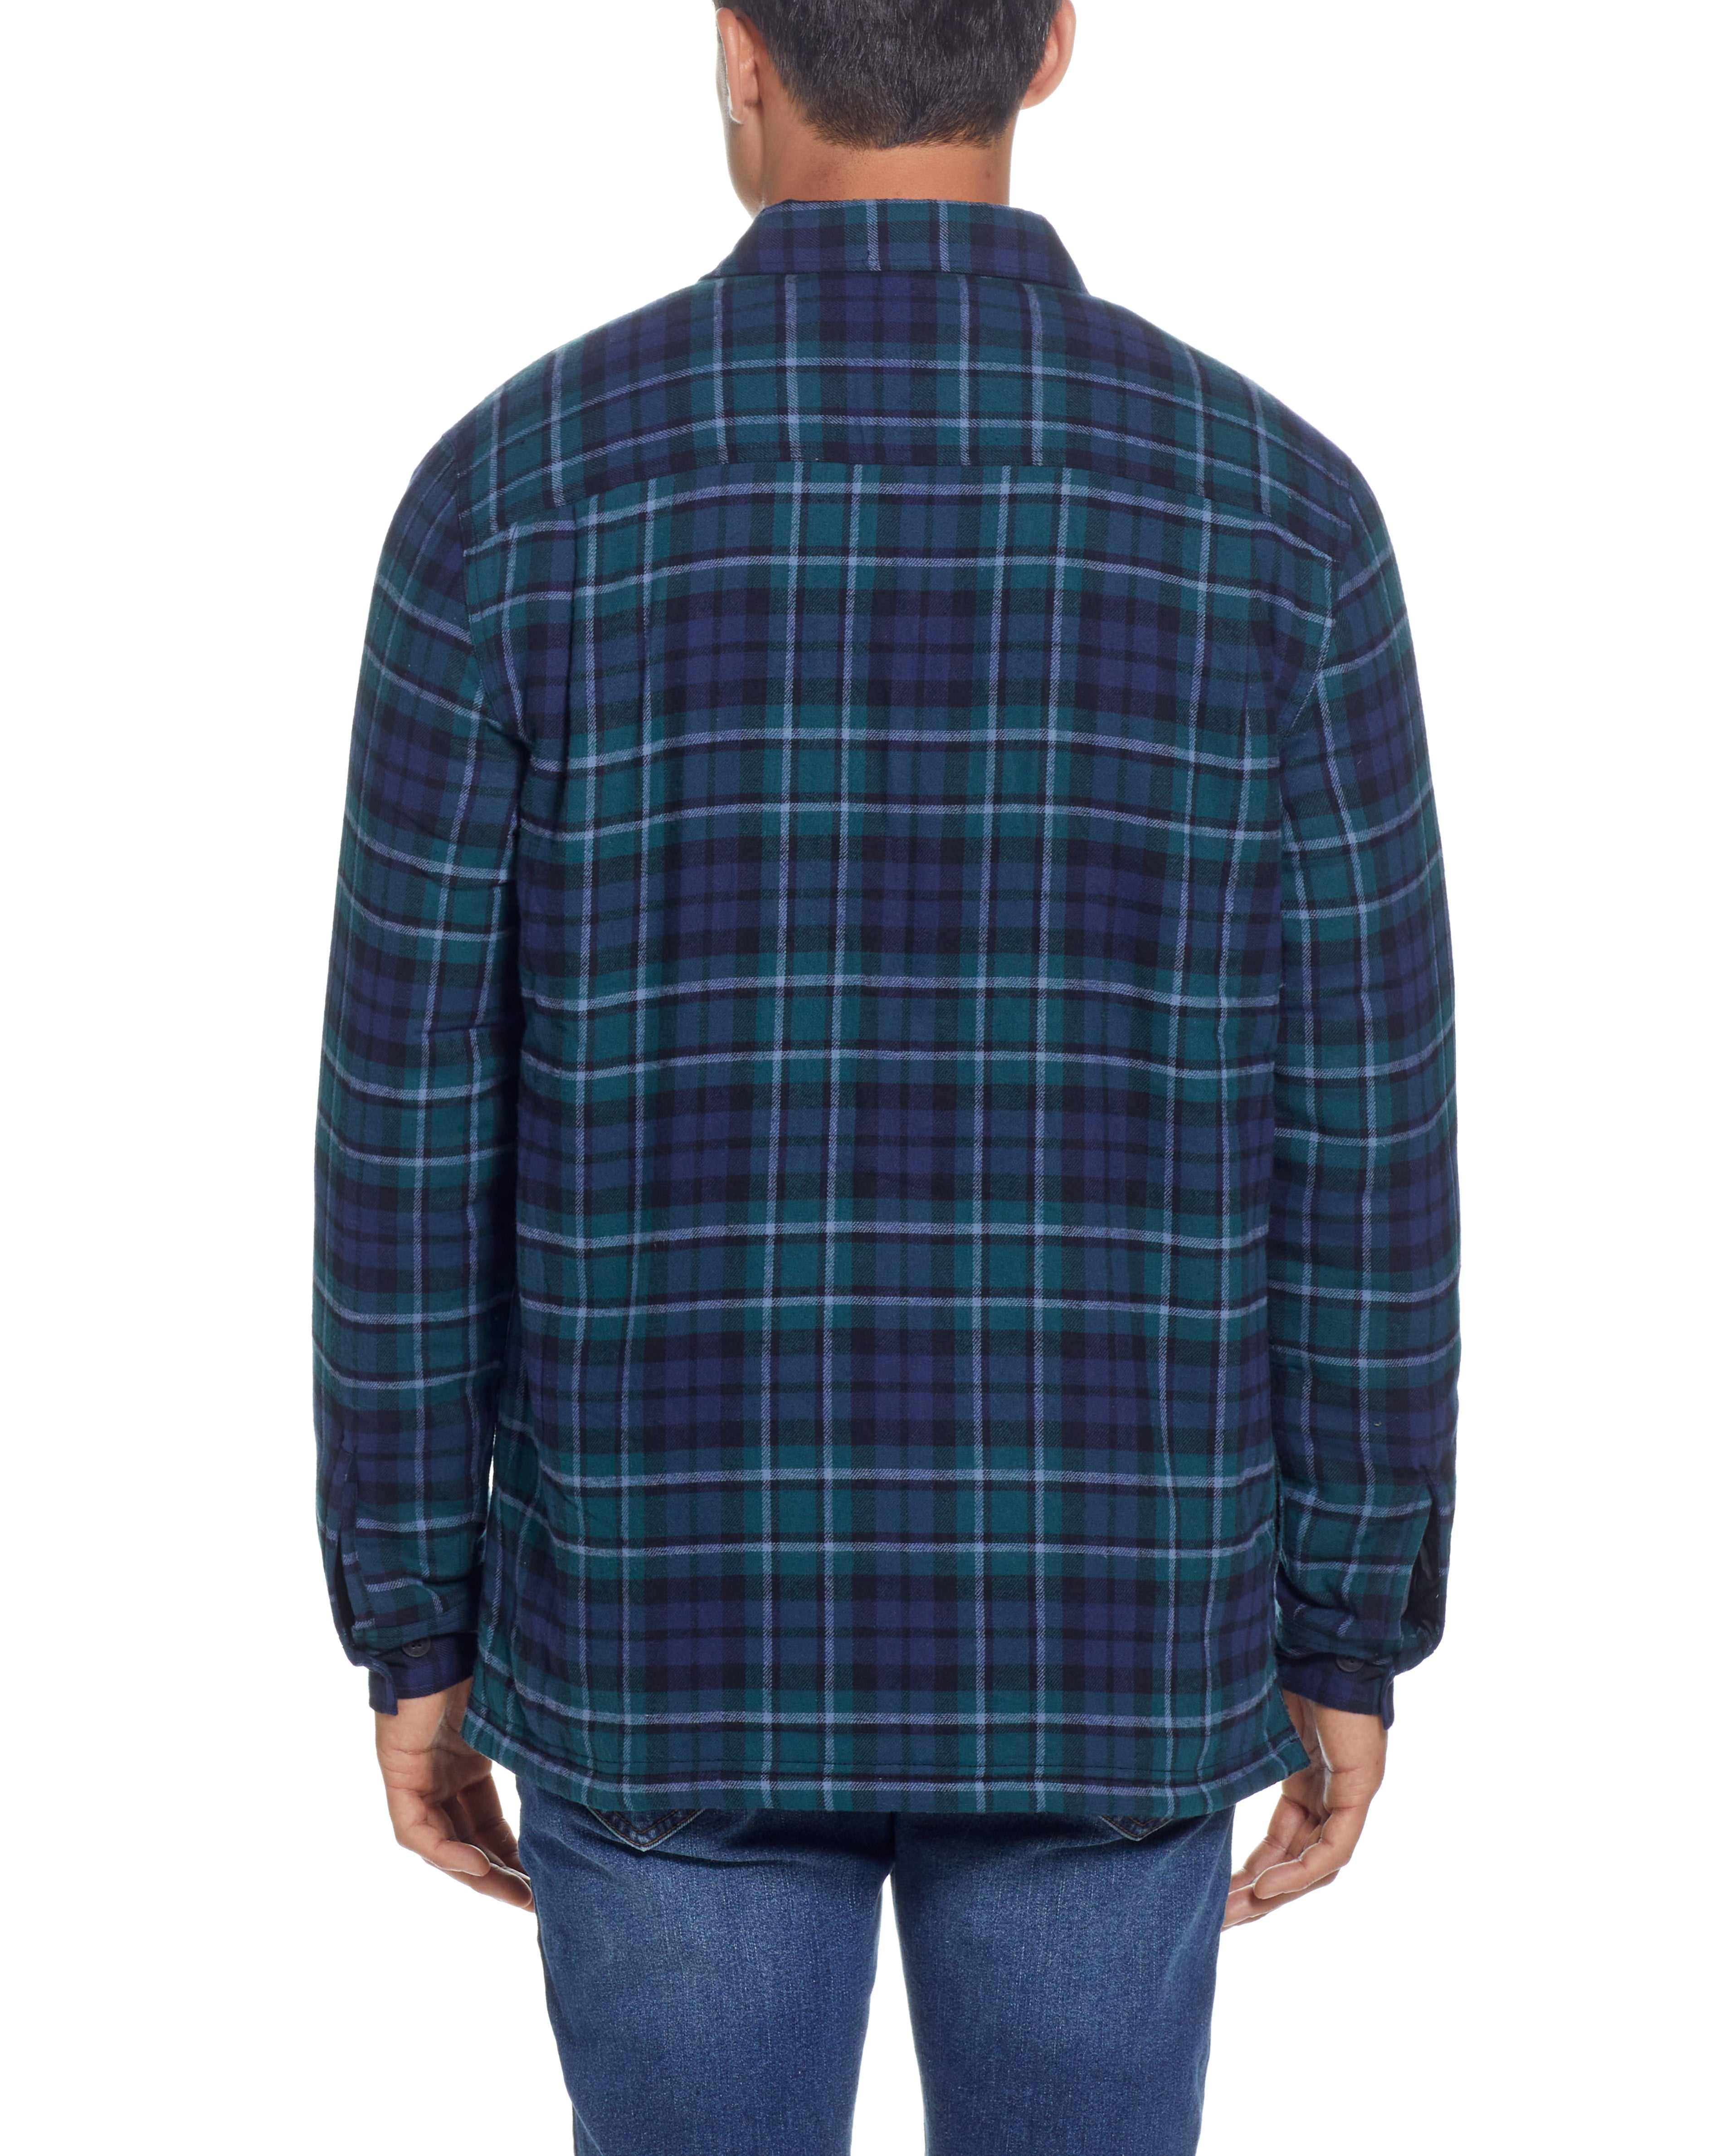 SHERPA LINED SHIRT JACKET IN EVERGREEN